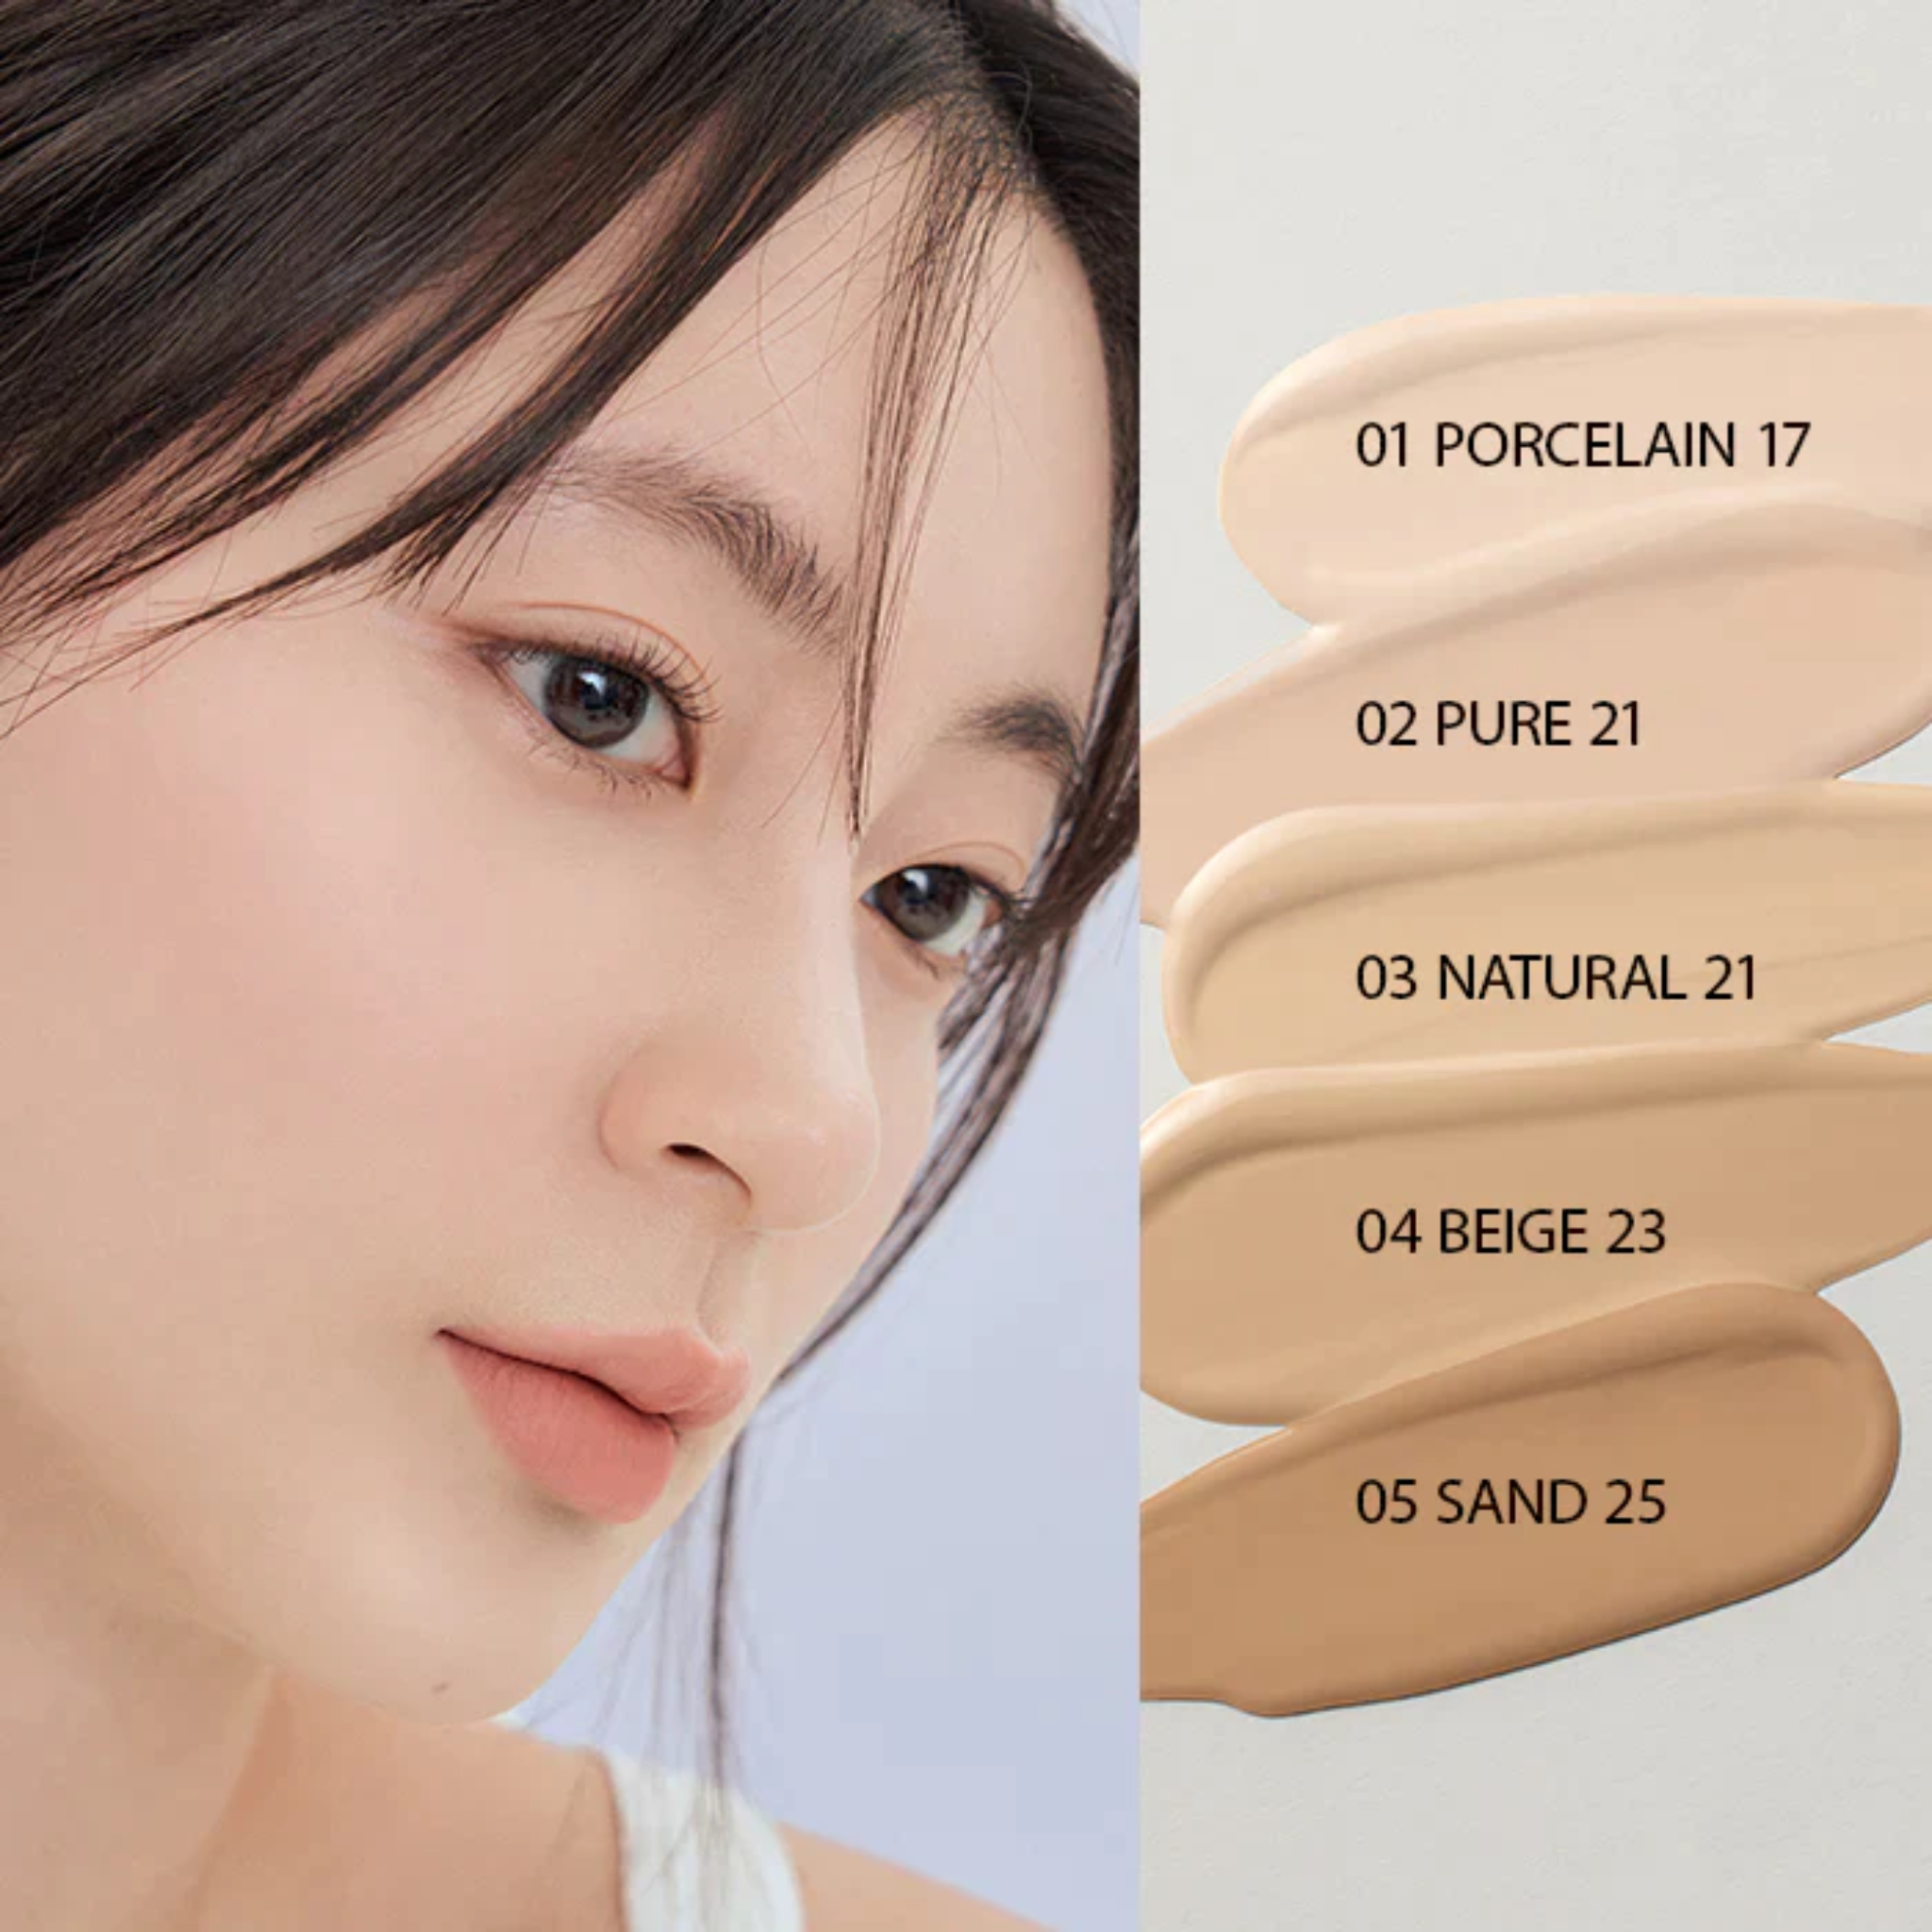 ROM&ND NU Zero Cushion - 5 Shades (15g) model picture with foundation swatches